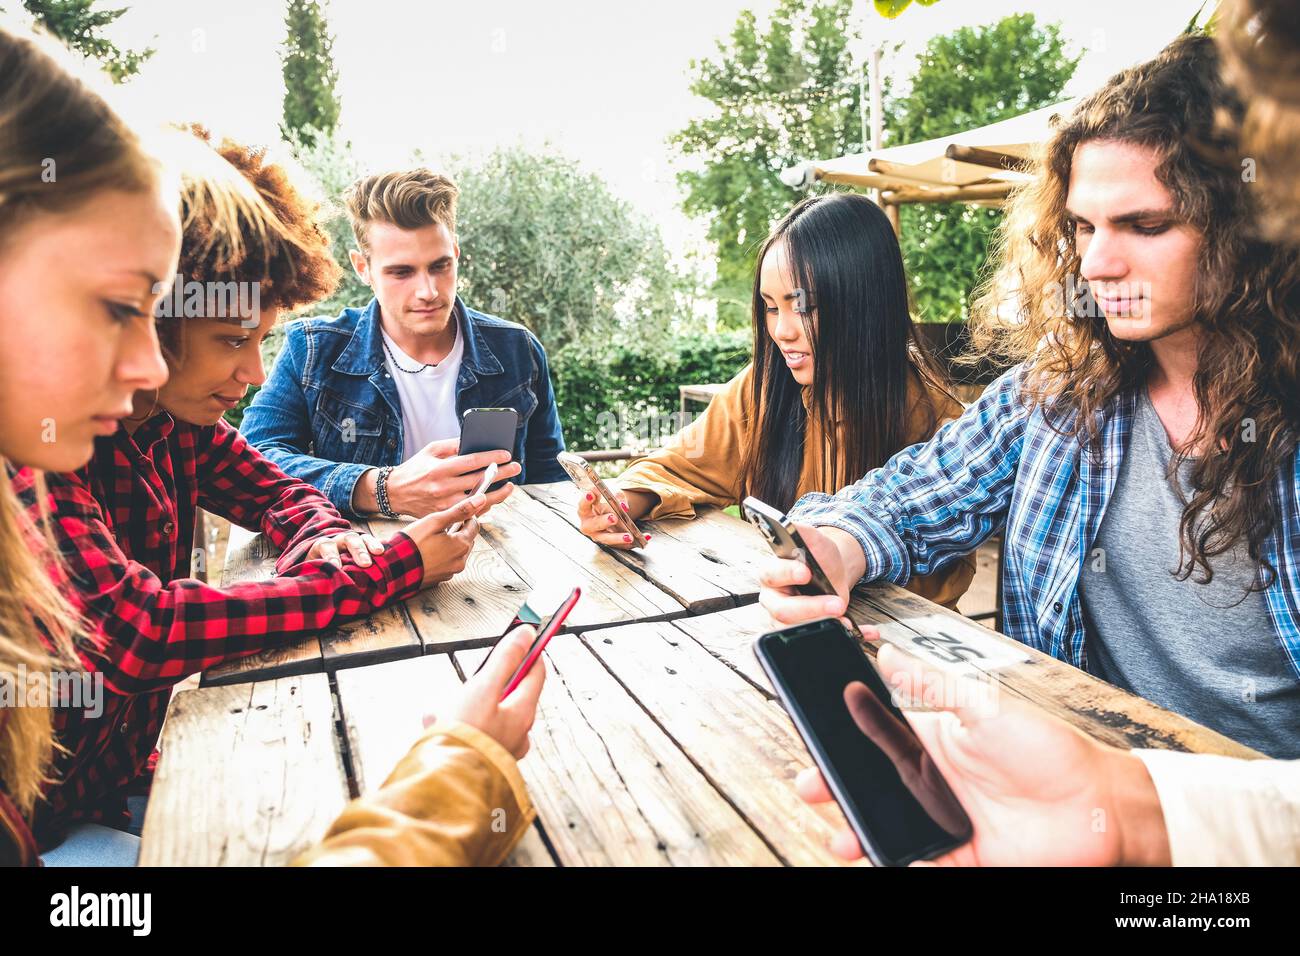 Group of friends checking social media on smartphones at restaurant or pub and ignoring each other Stock Photo